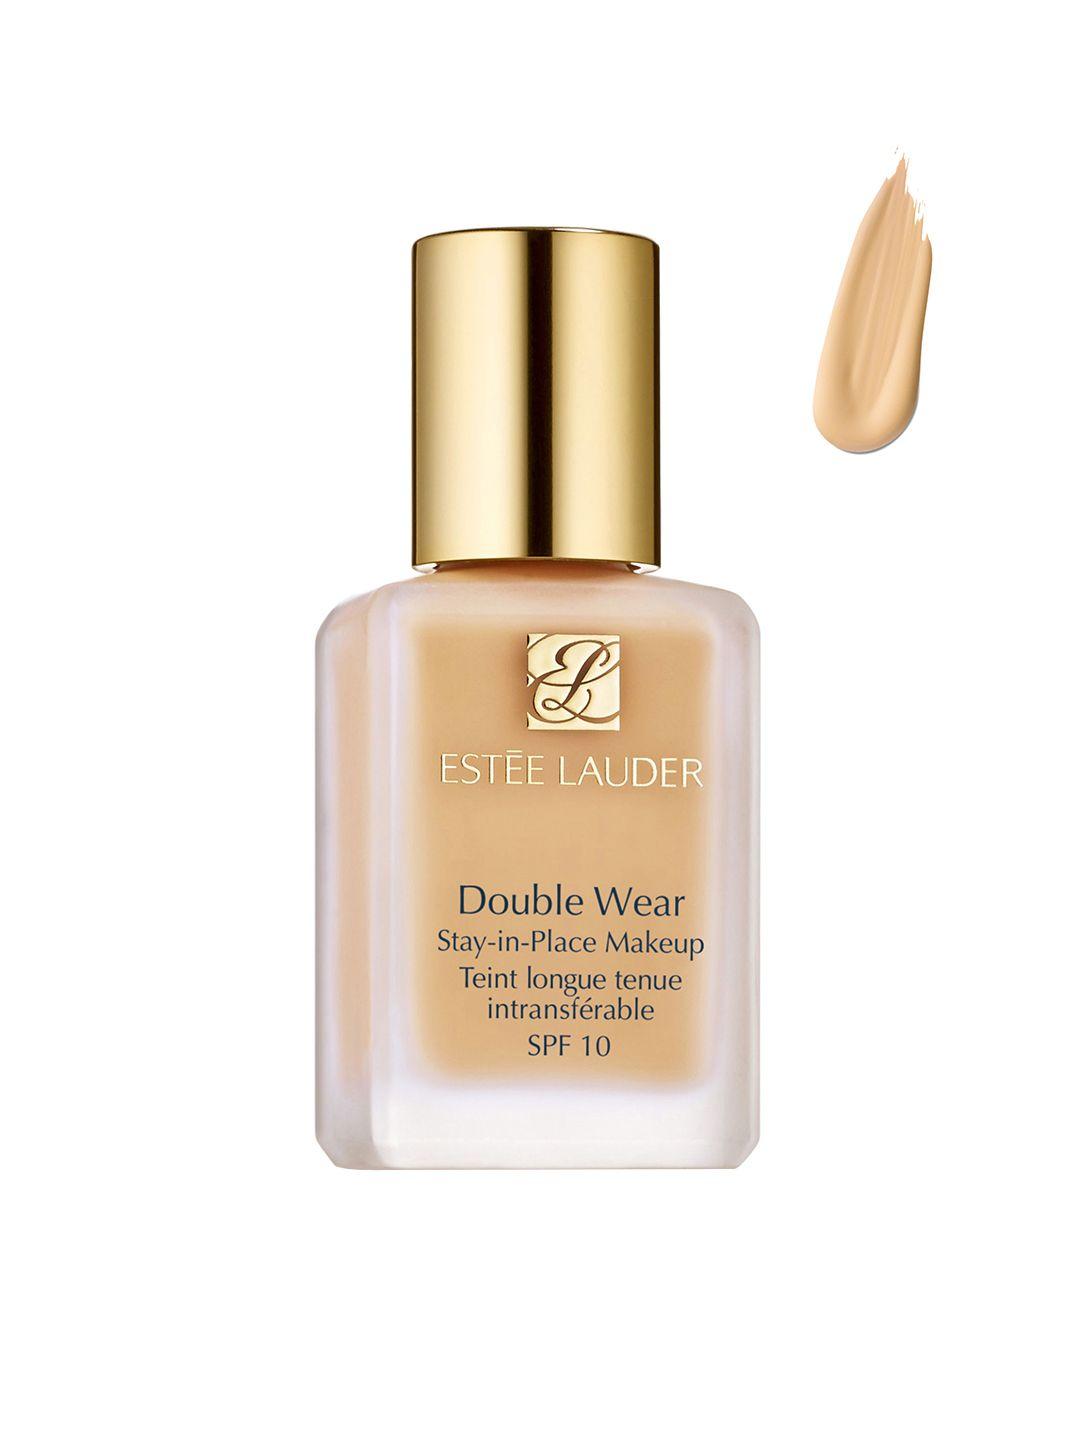 estee lauder double wear stay-in-place makeup foundation with spf 10 - warm porcelain 30ml